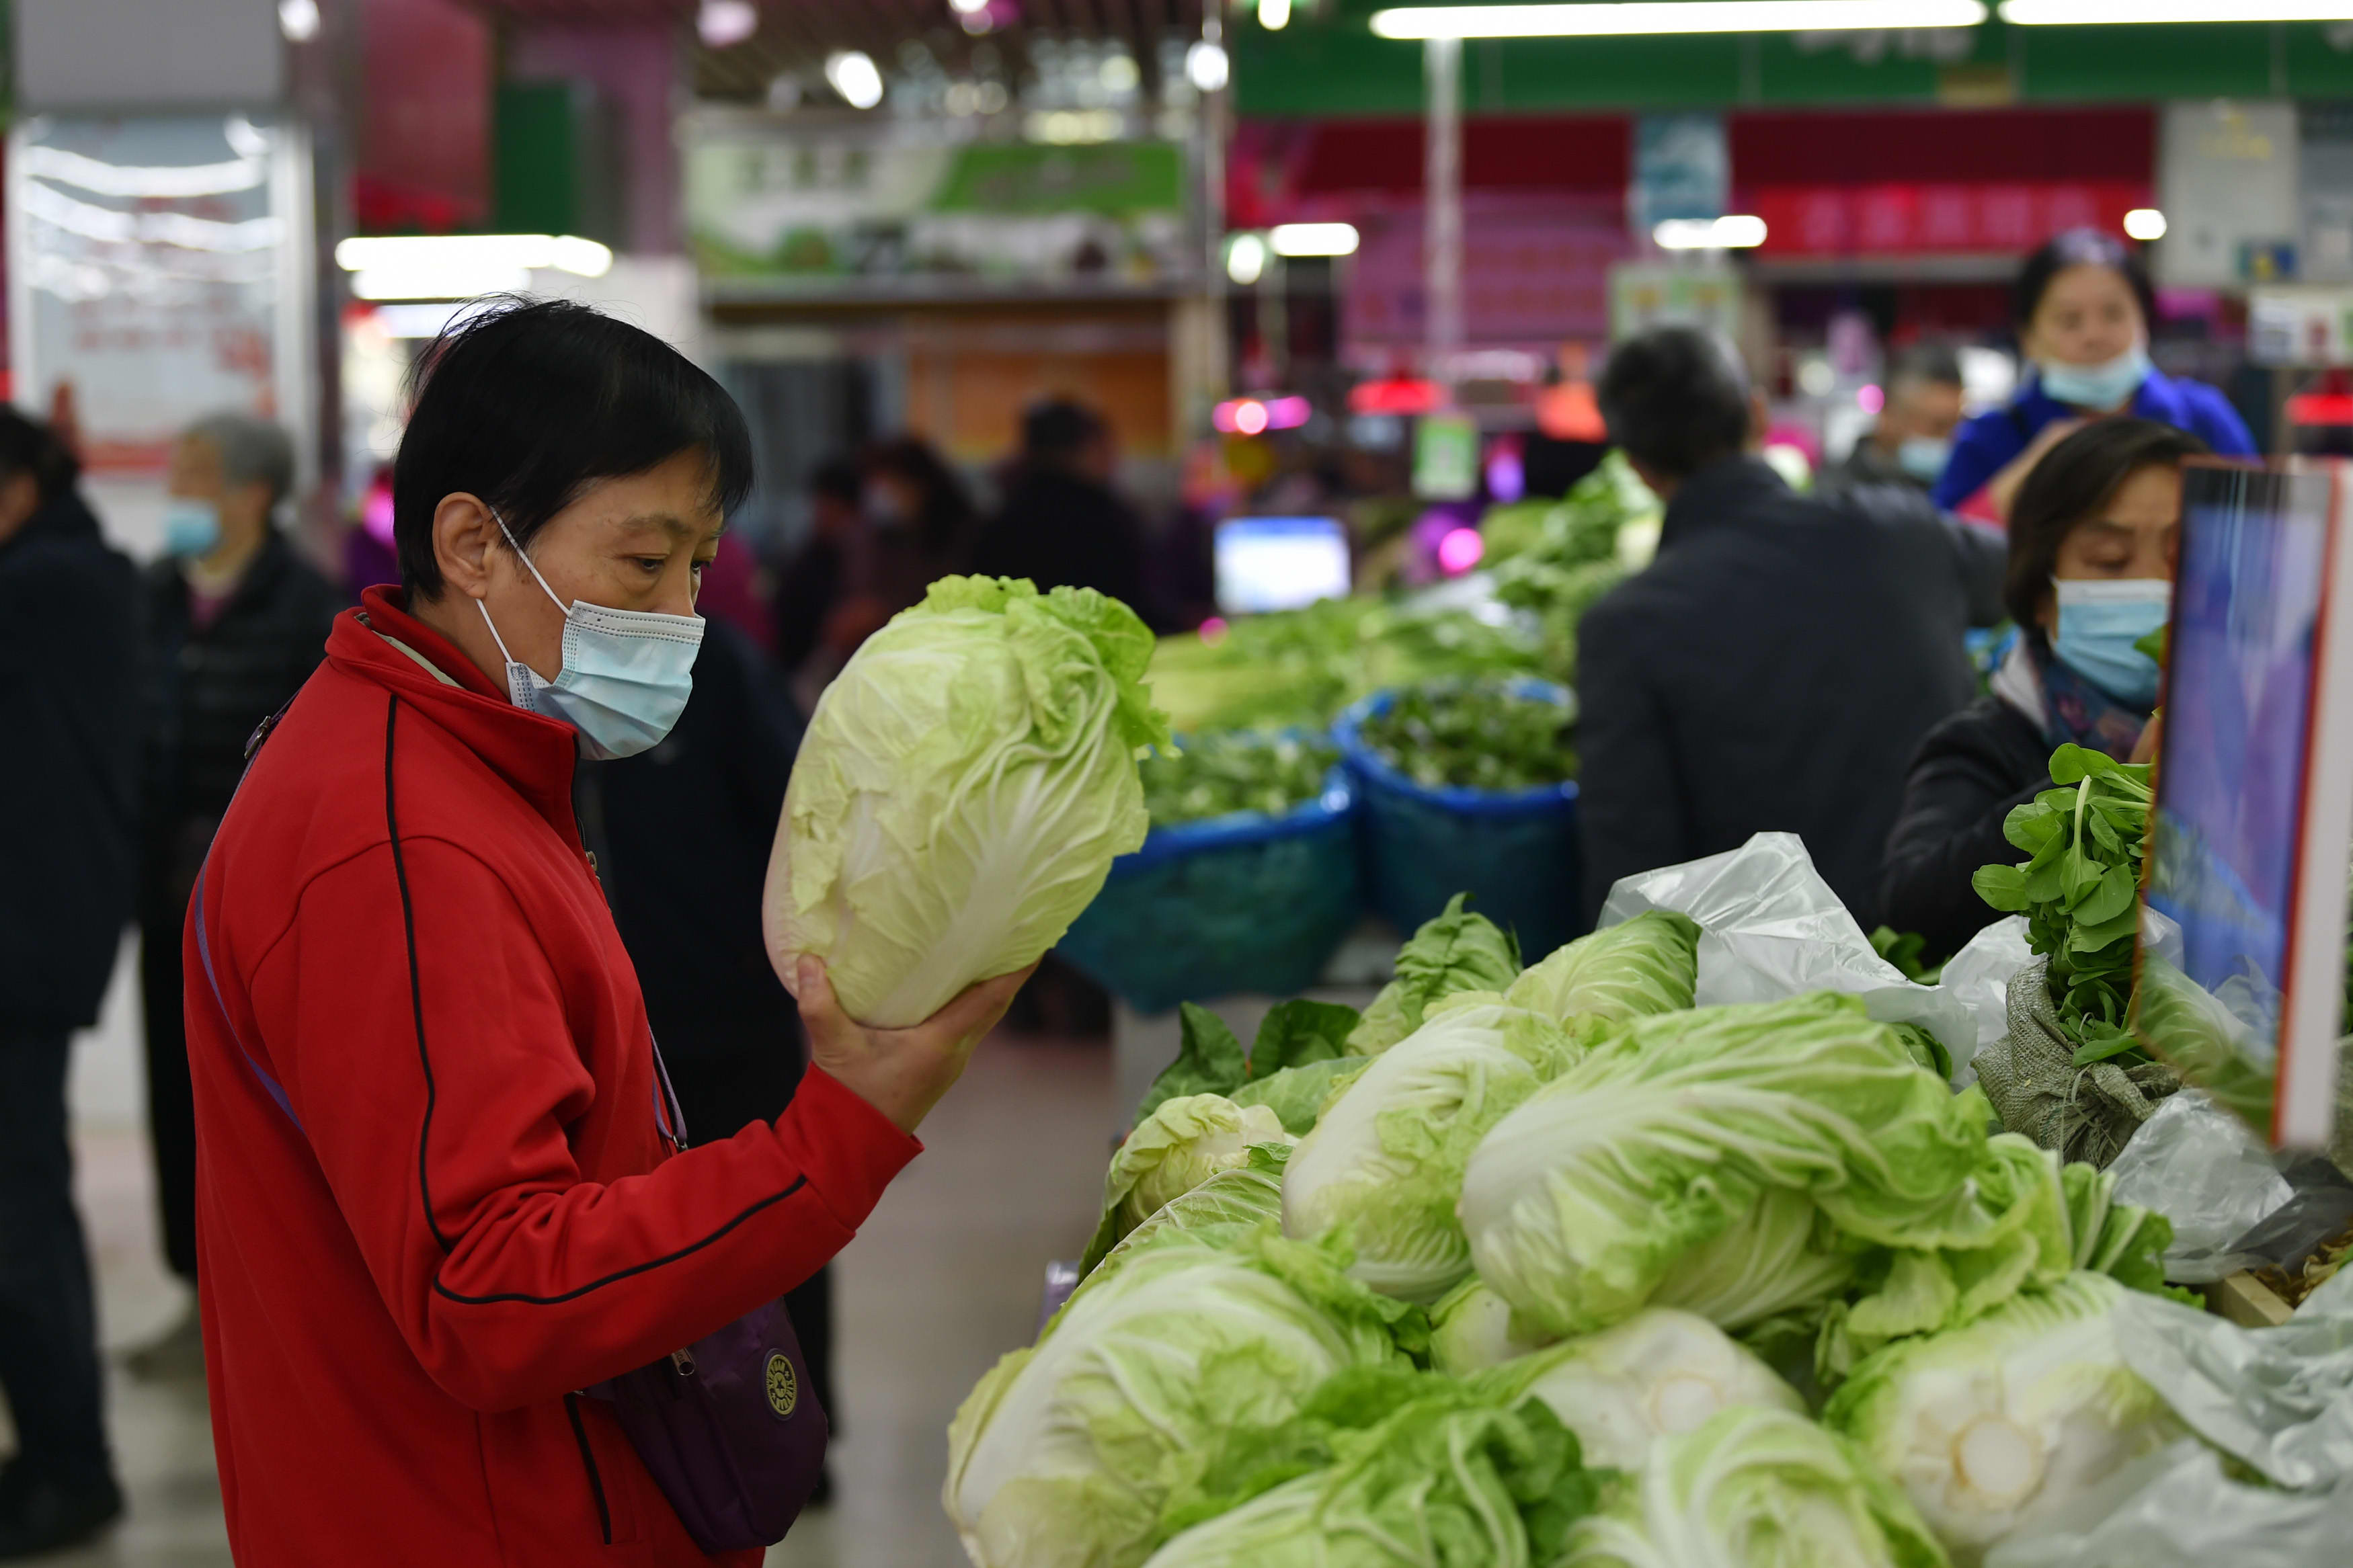 China’s vegetable prices rise by 30.6% in November as food costs rise